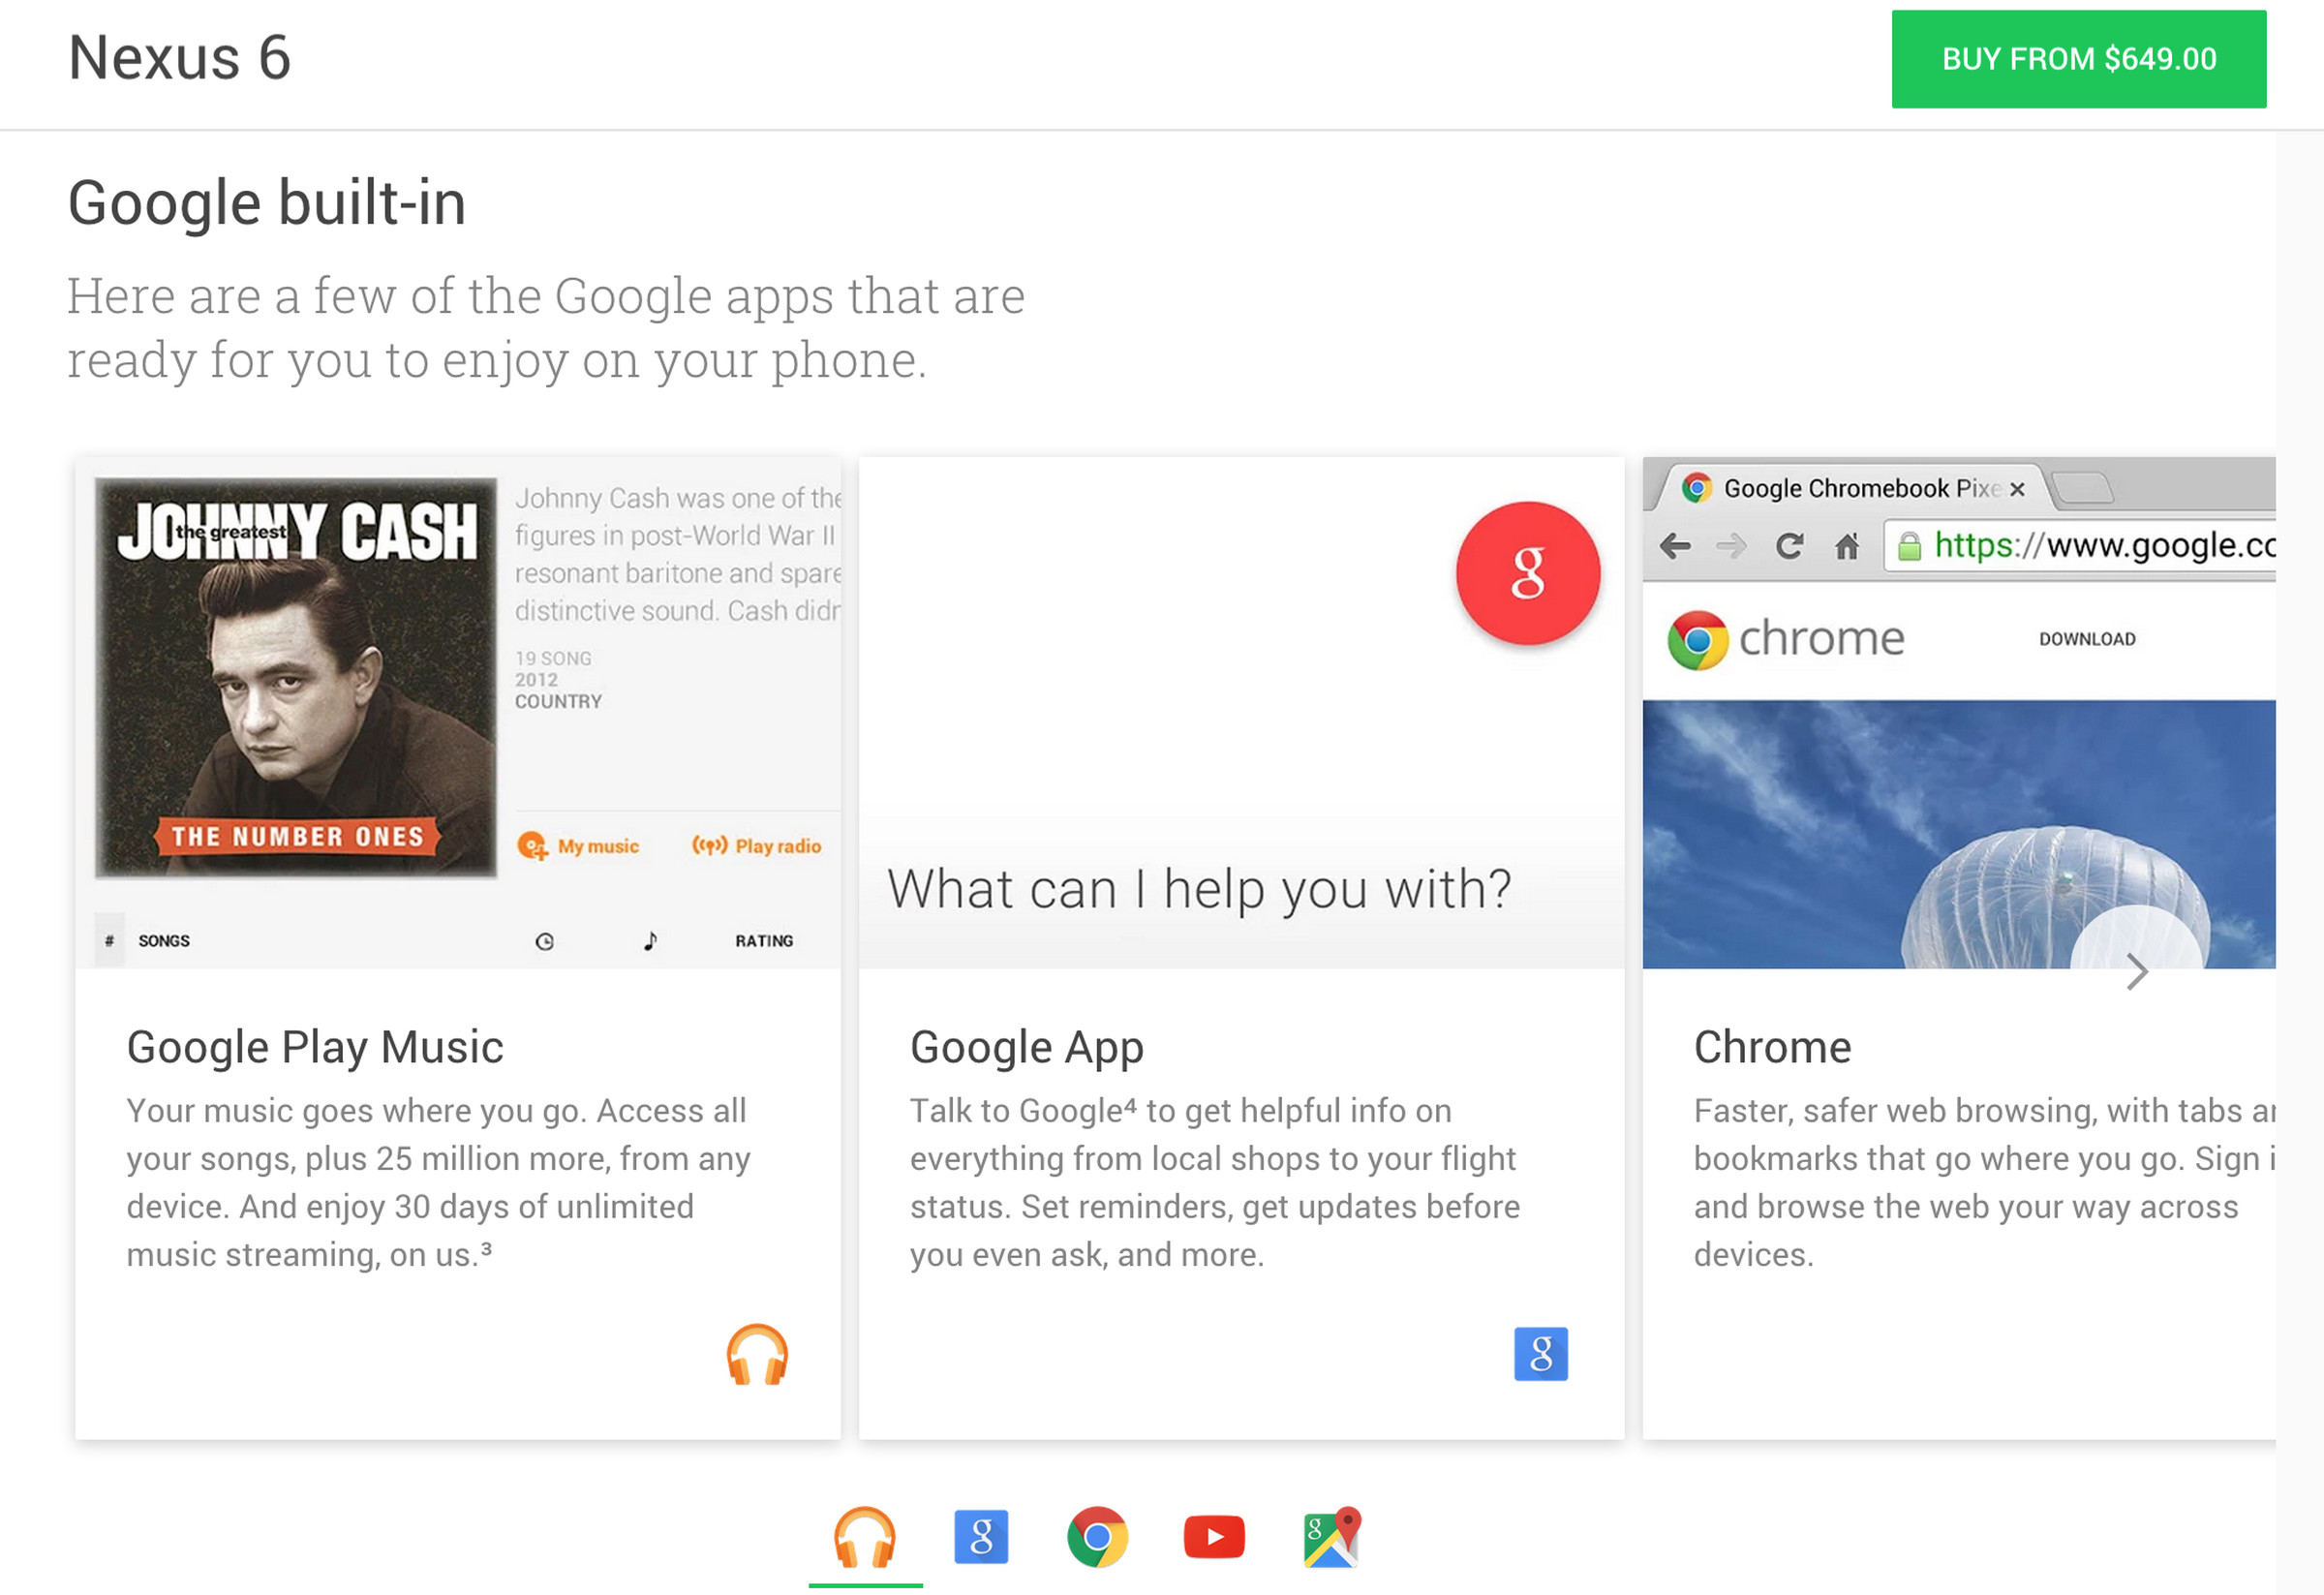 Google Store featured services